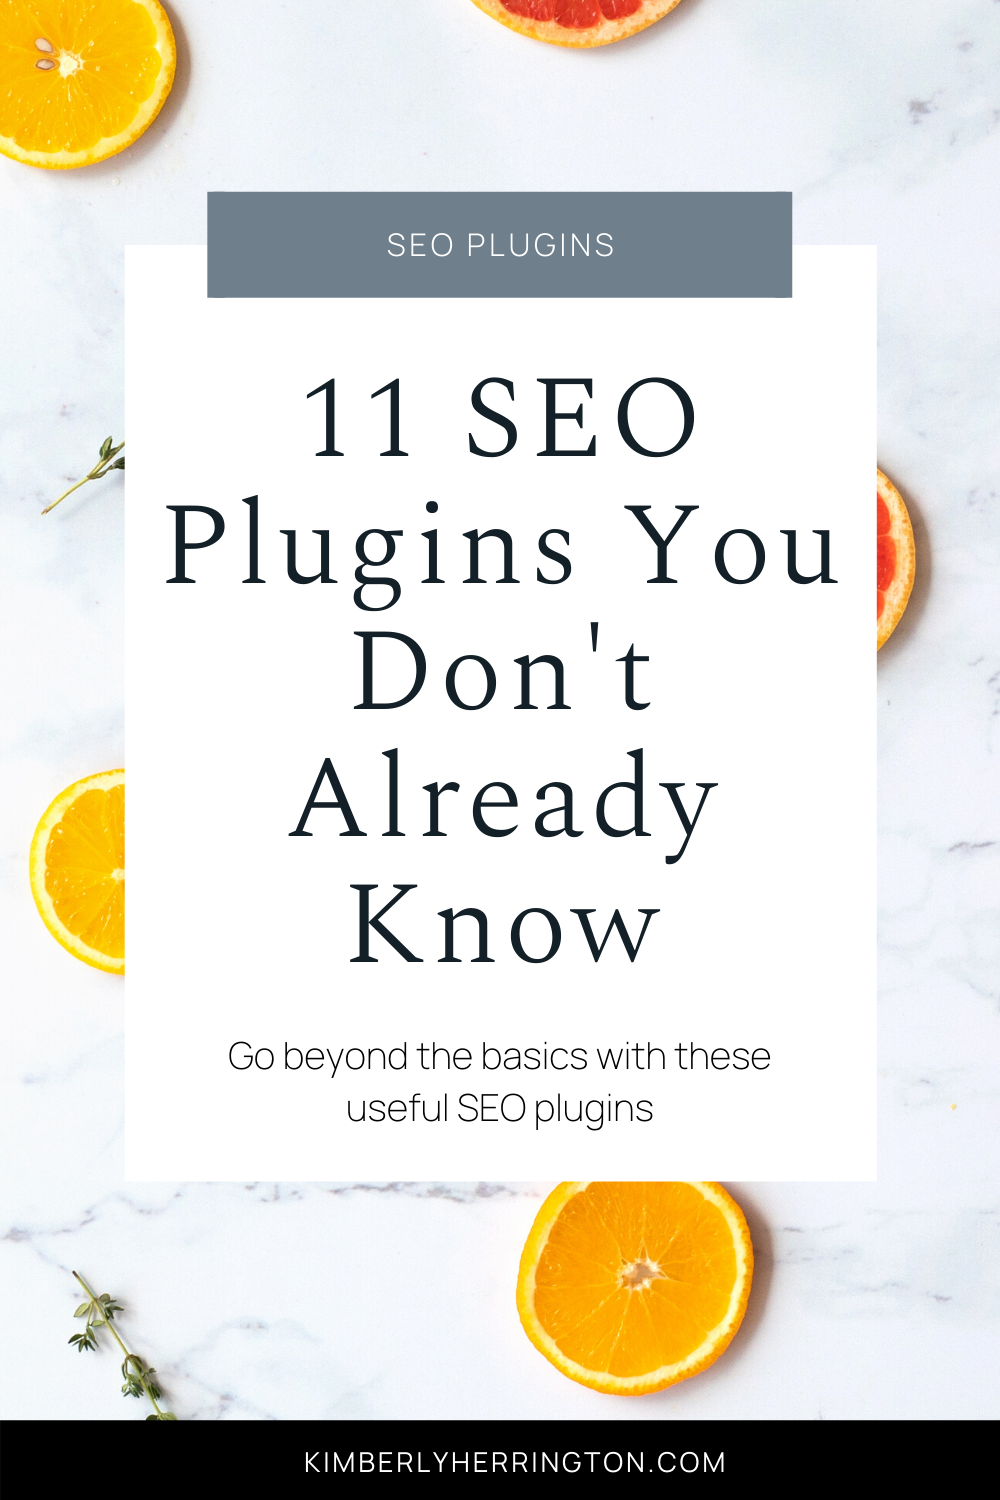 11 SEO Plugins You Haven’t Heard Of